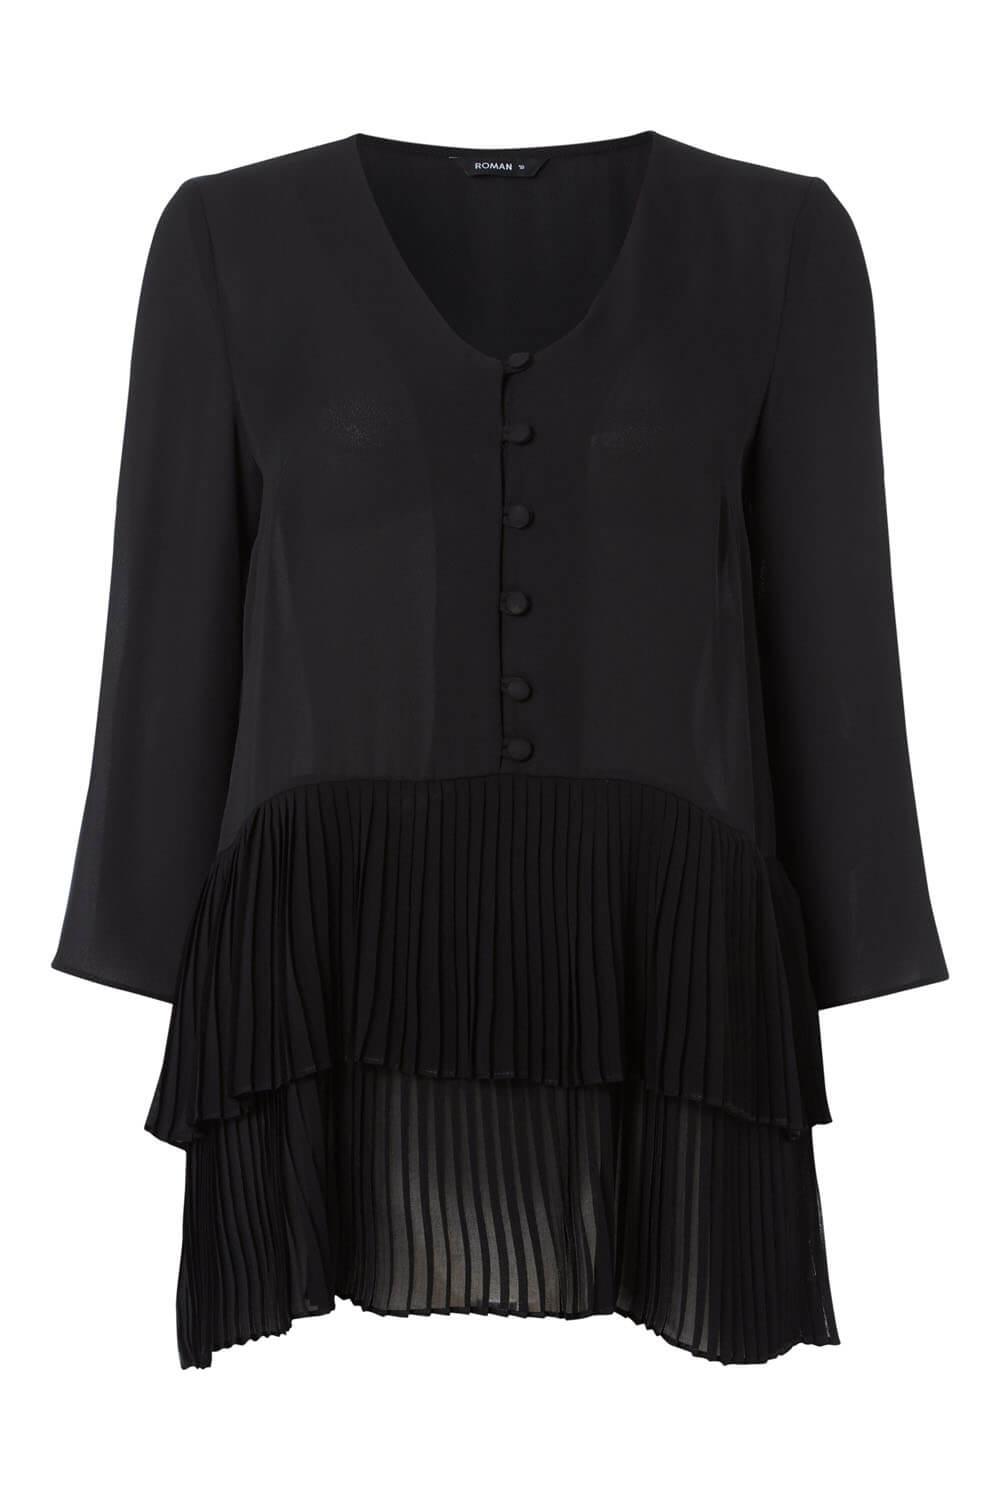 Black 3/4 Sleeve Pleated Button Front Top, Image 6 of 6